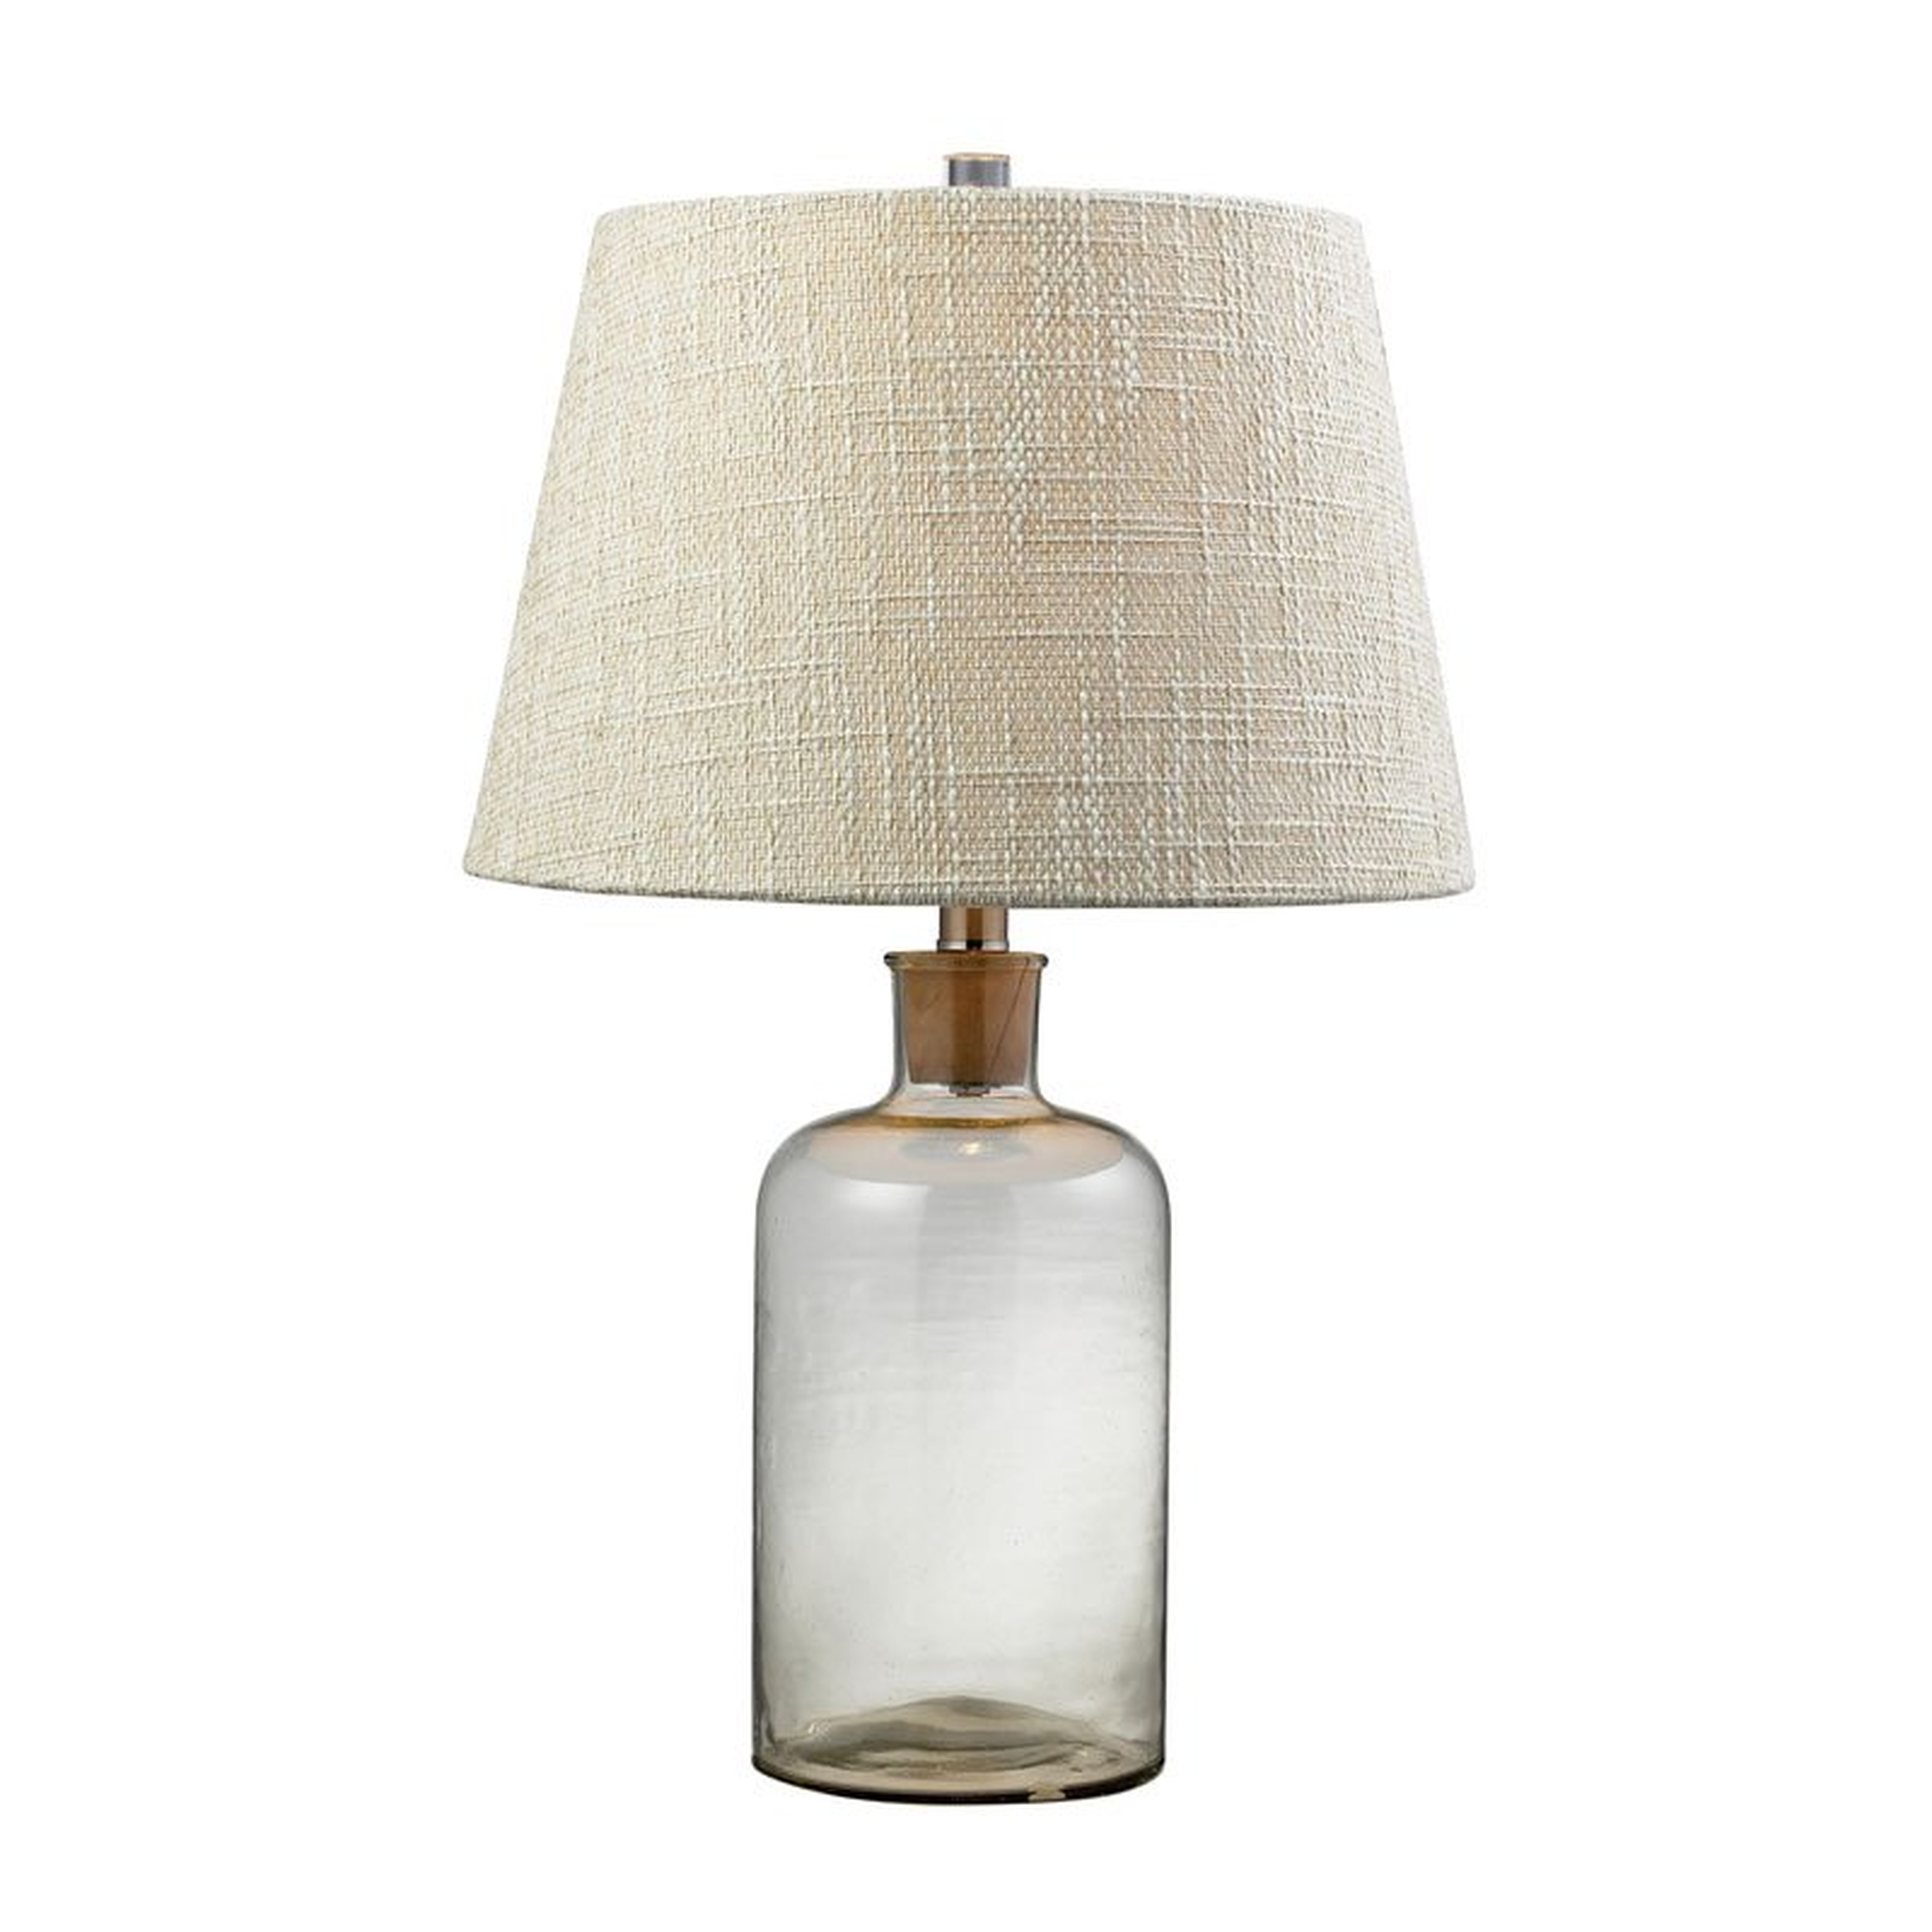 Clear Glass Bottle Table Lamp With Wooden Neck - Elk Home